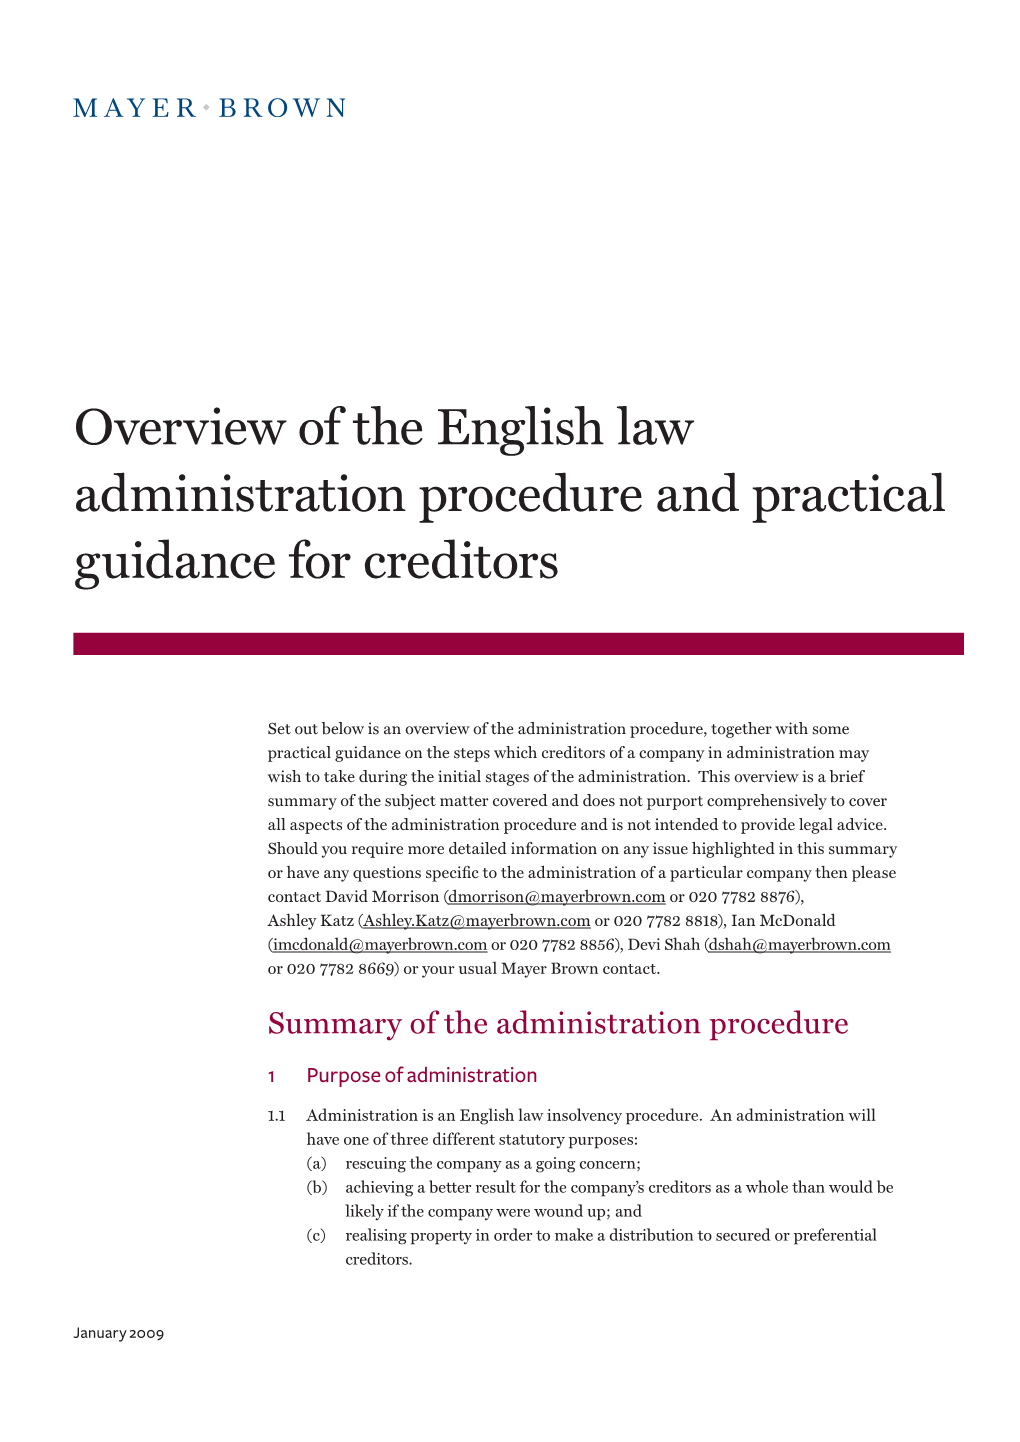 Overview of the English Law Administration Procedure and Practical Guidance for Creditors